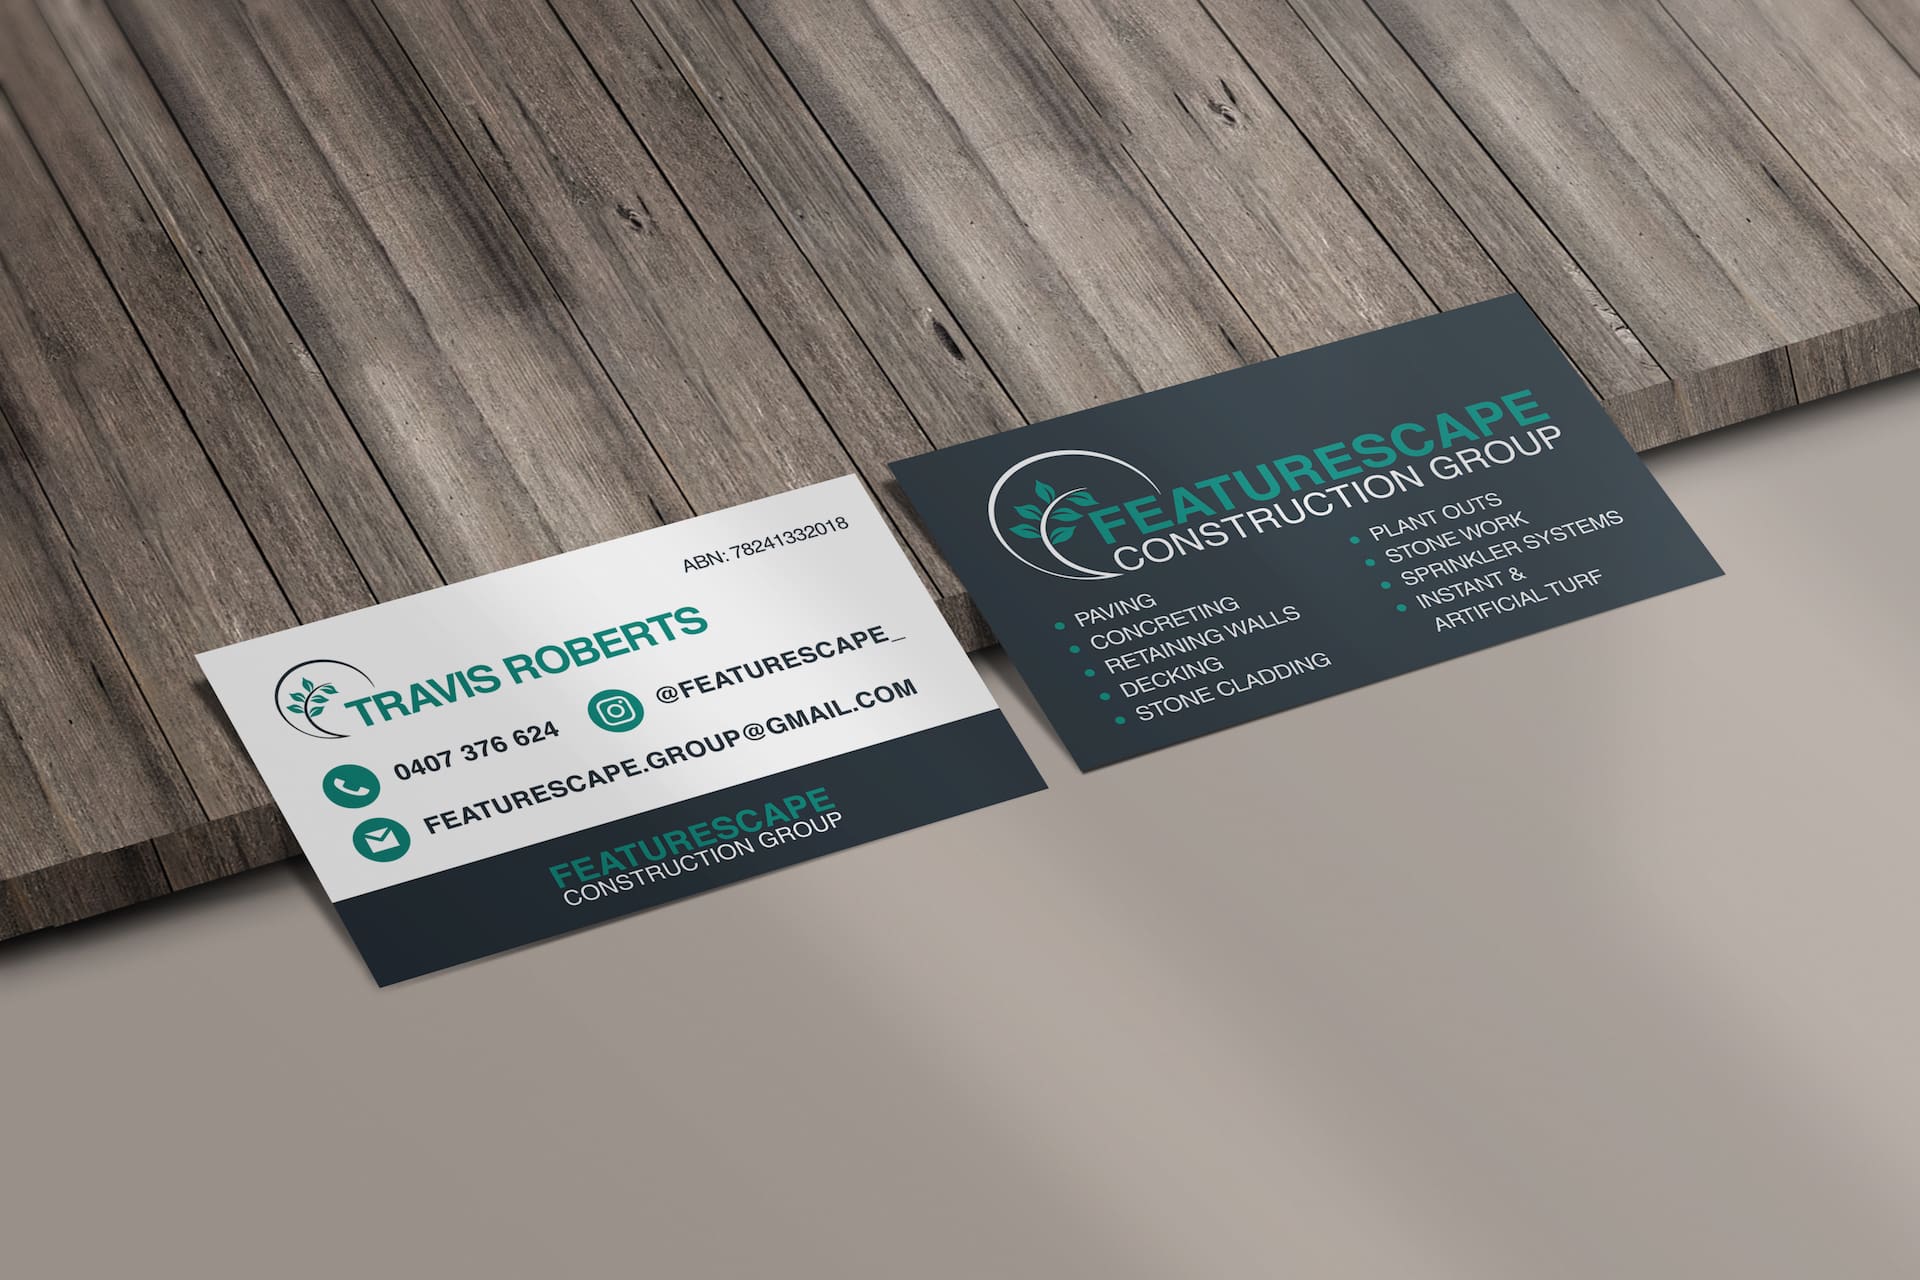 Featurescape Construction Group branding and business cards, designed by Spacey Studios